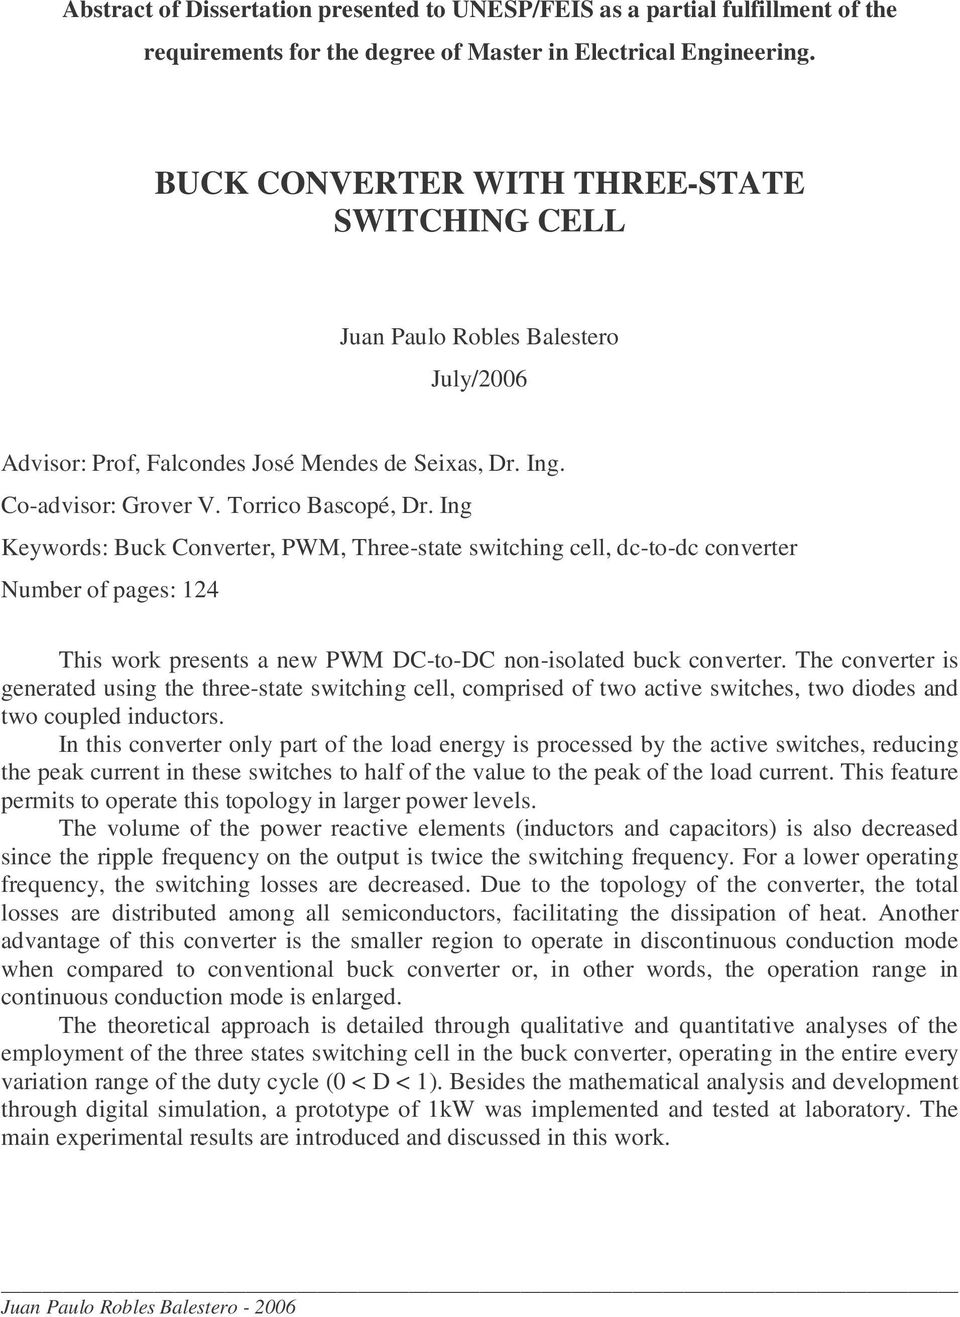 Ing Keywords: Buck nverer, PWM, hreesae swiching cell, dcodc converer Number of pages: 4 his work presens a new PWM DDC nonisolaed buck converer.